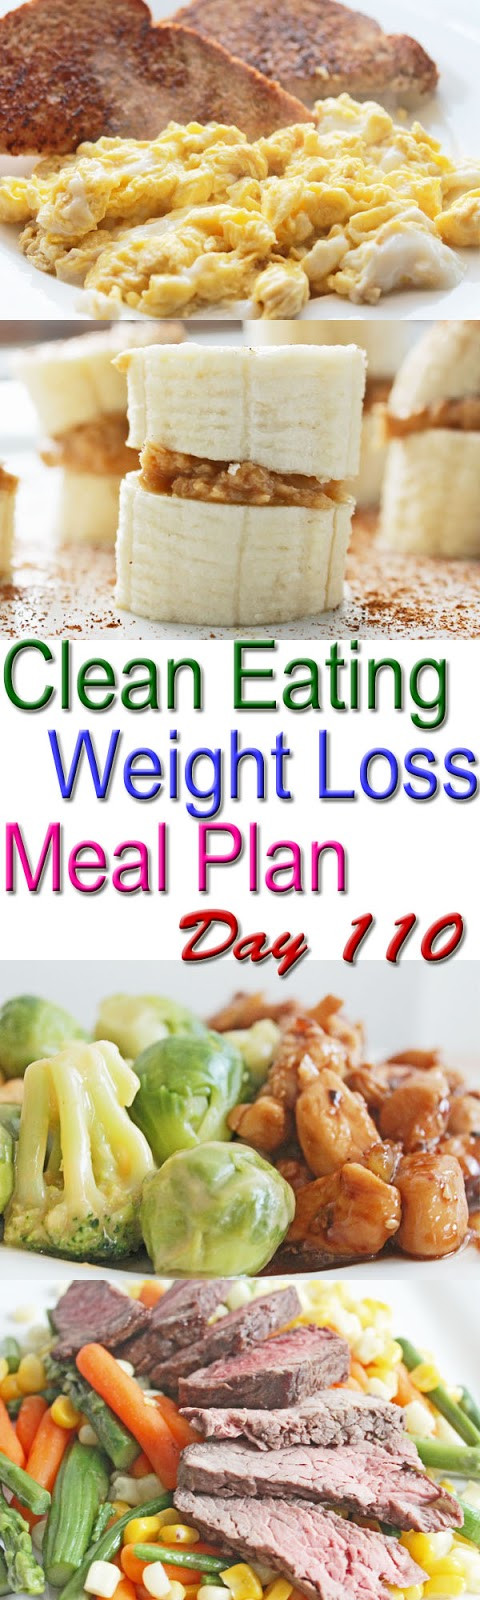 Clean Eating Weight Loss Meal Plan
 Clean Eating Weight Loss Meal Plan 110